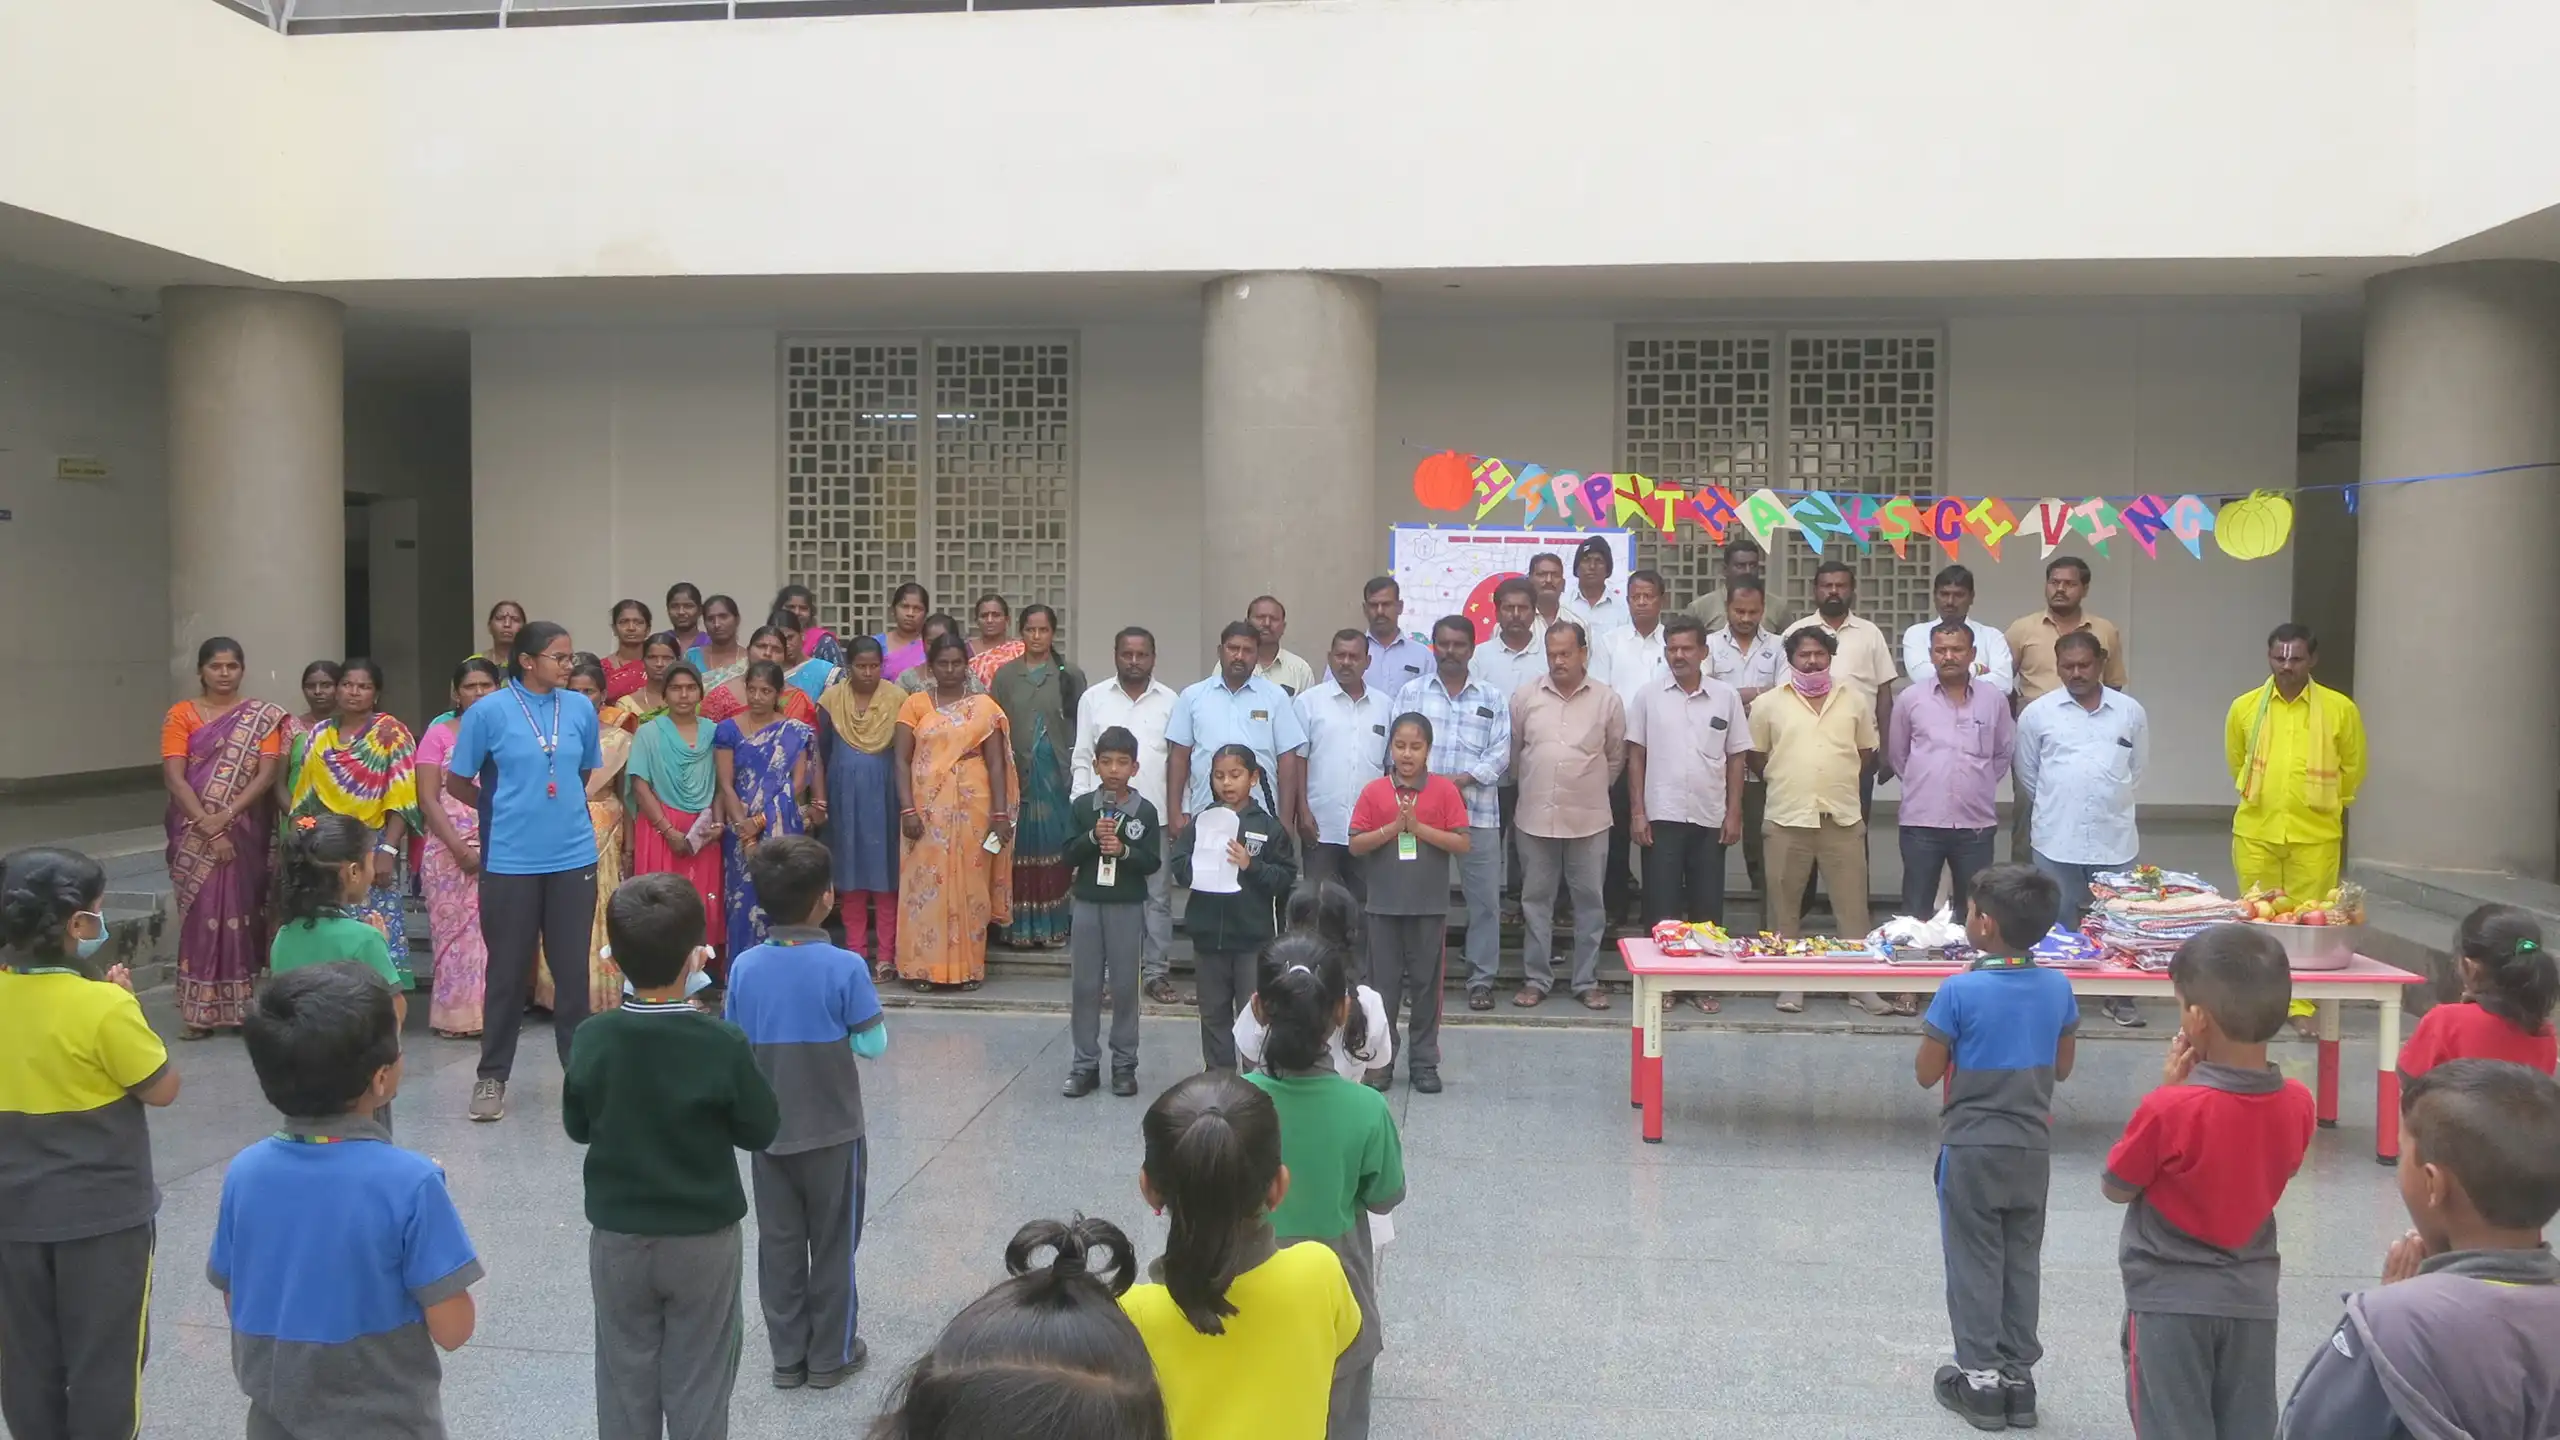 Students of DPS Warangal participating in various activities and giving speech during morning assembly.